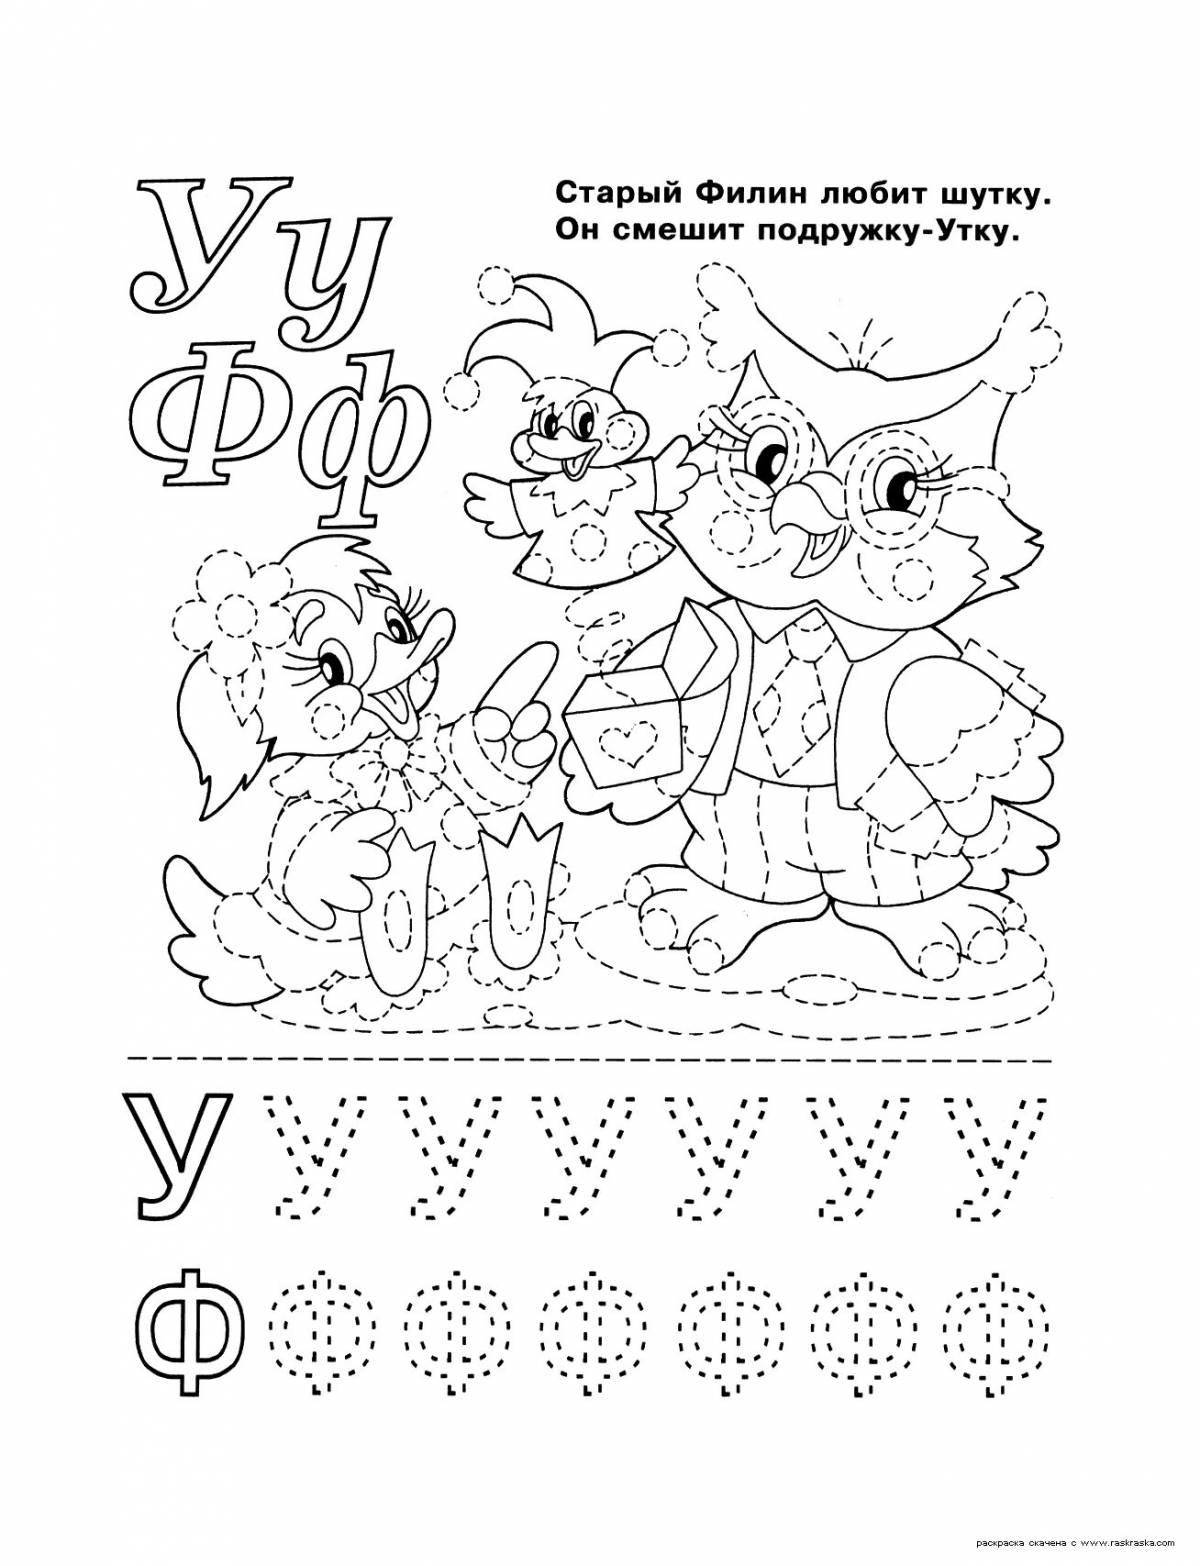 Colored coloring book with letters for children 5-7 years old